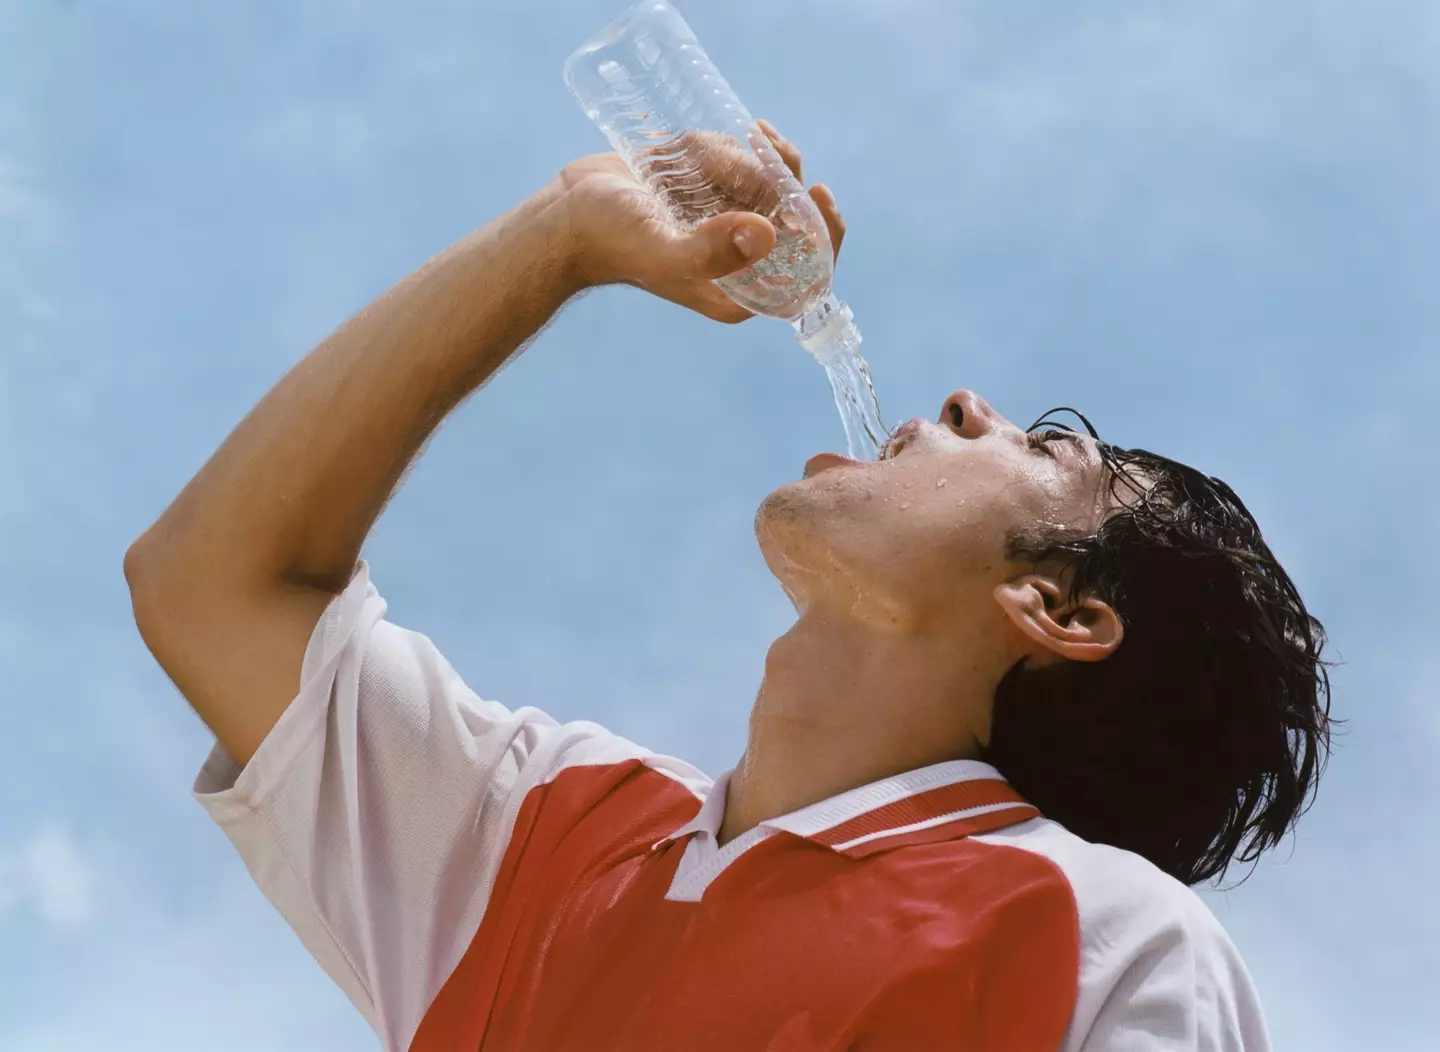 Water is really important as summer rolls around, but keep in mind where it's from. (Getty Stock Photo)